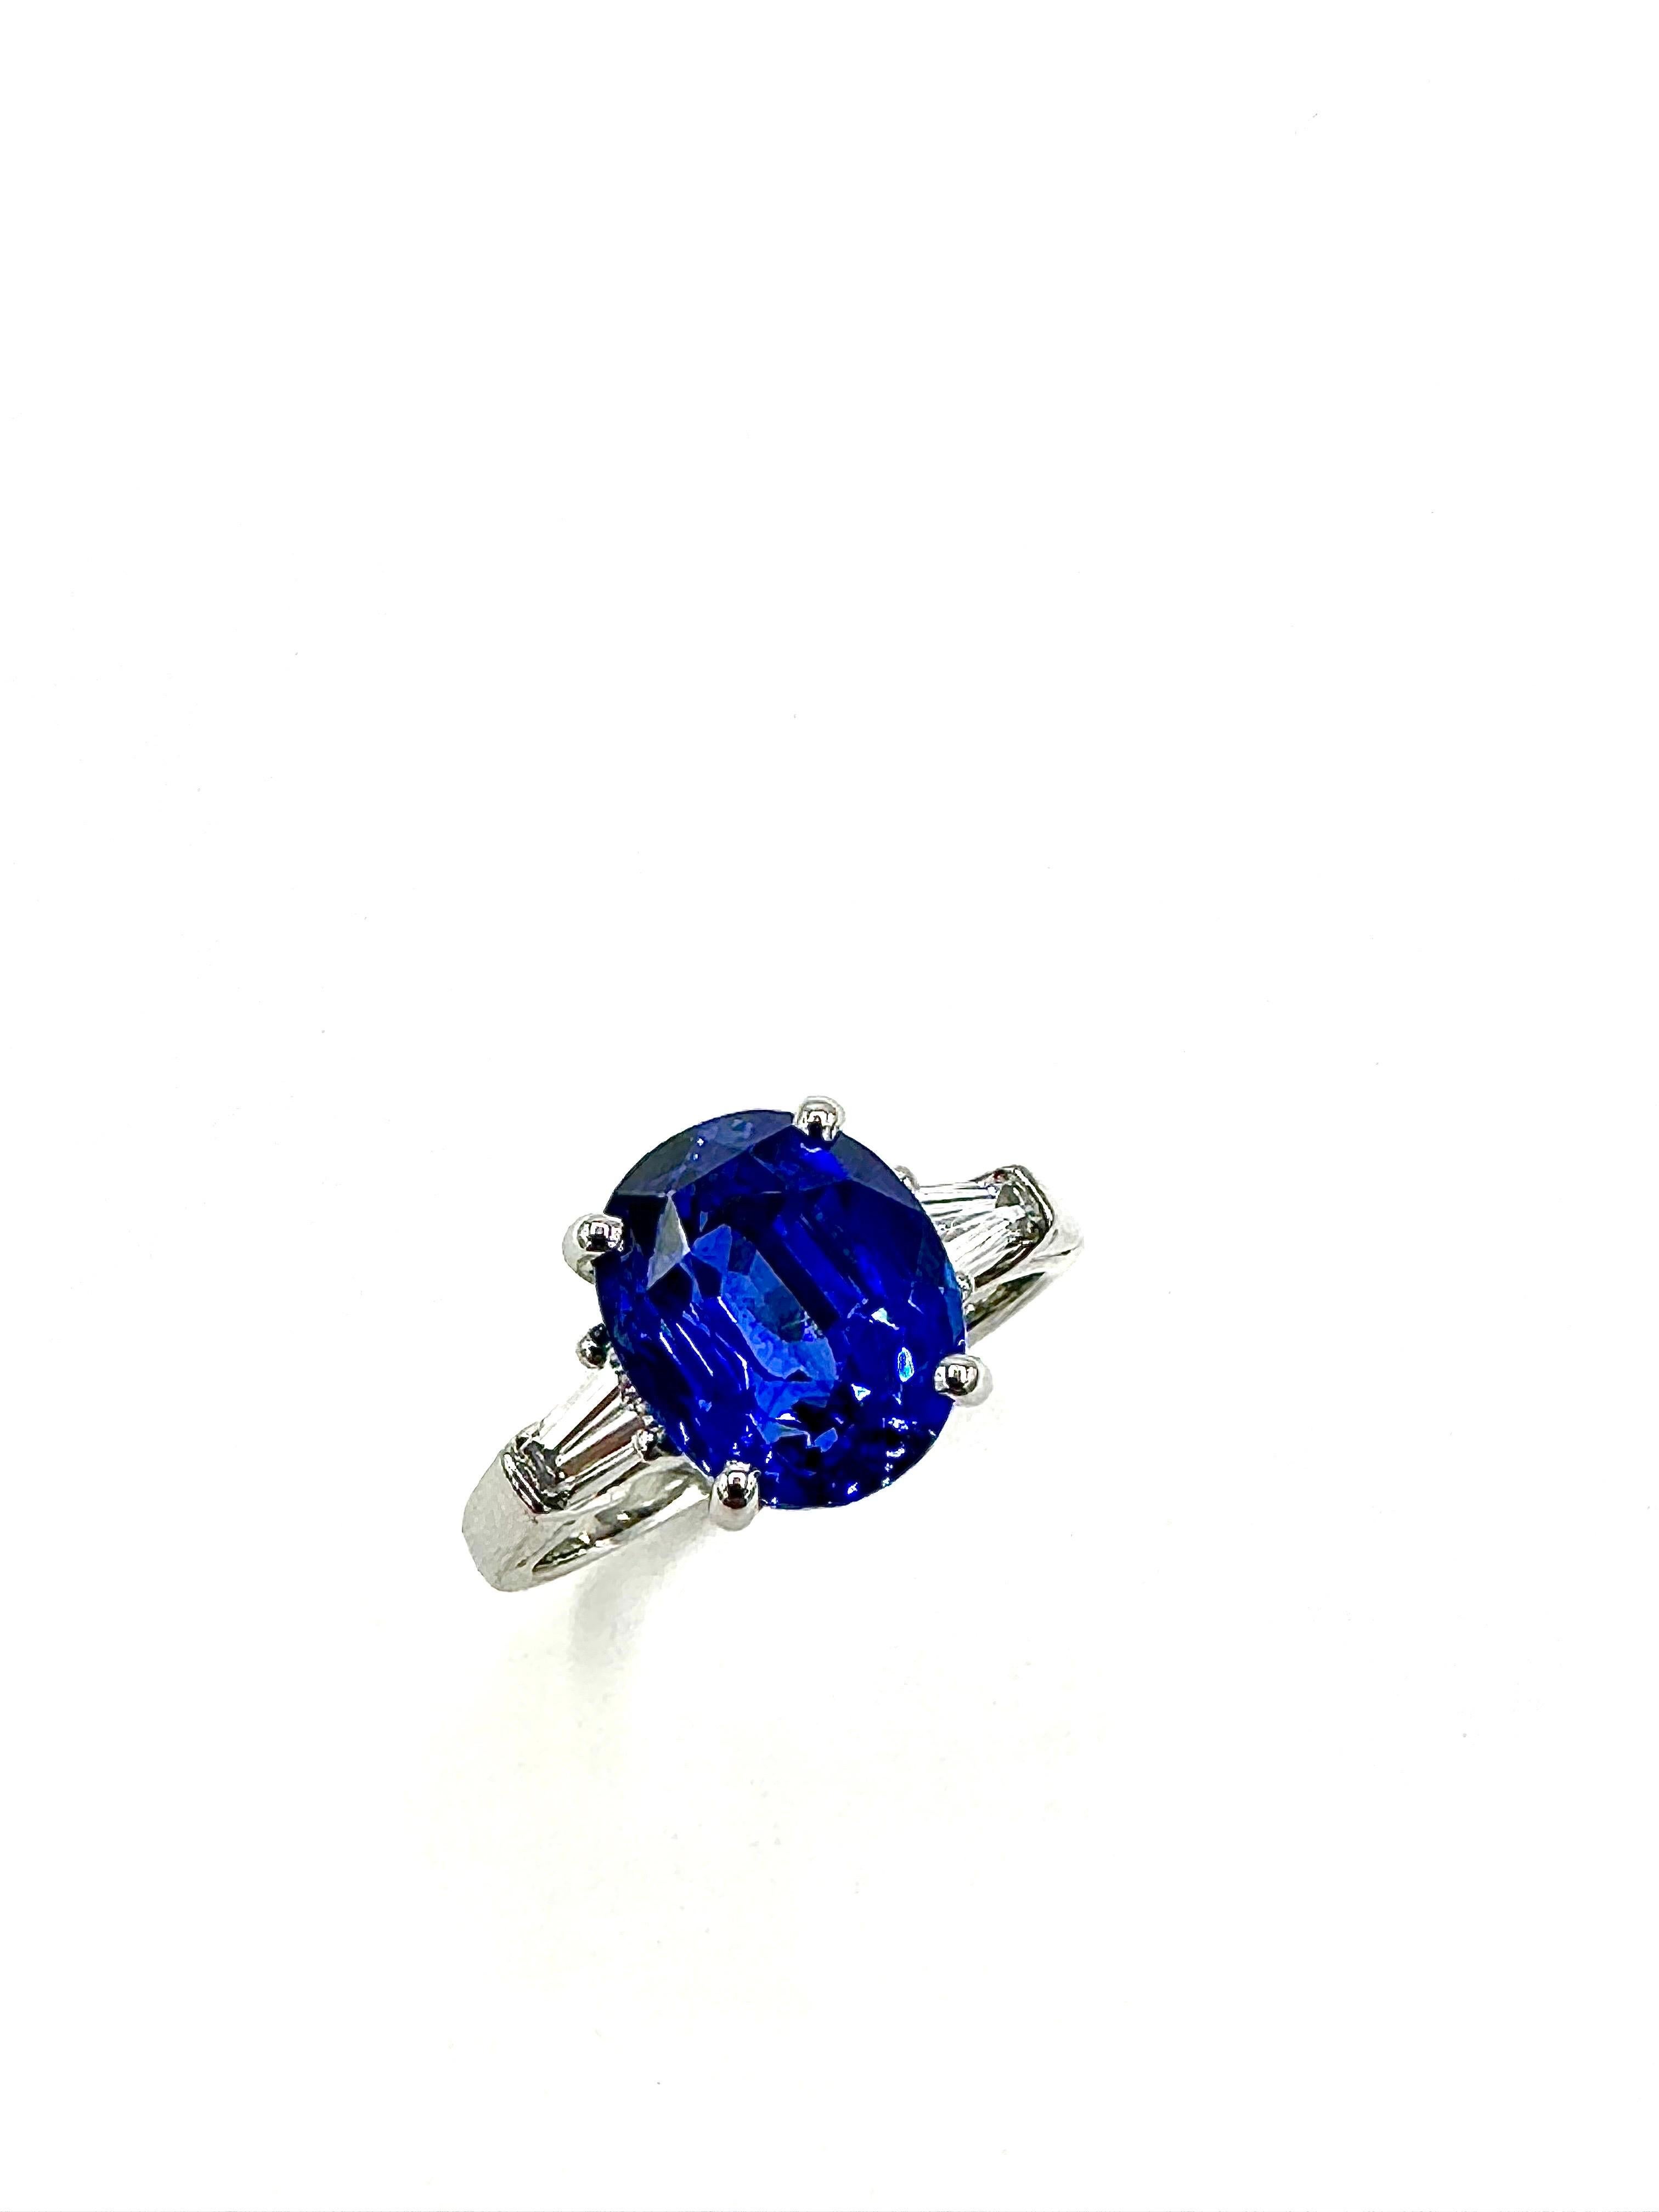 A stunning Sapphire and Diamond ring by the designers at Oscar Heyman Brothers.  The ring features a 4.82 carat center oval shaped Sapphire, set with a single tapered baguette Diamond on each side, weighing 0.36 carats total, in platinum.  The